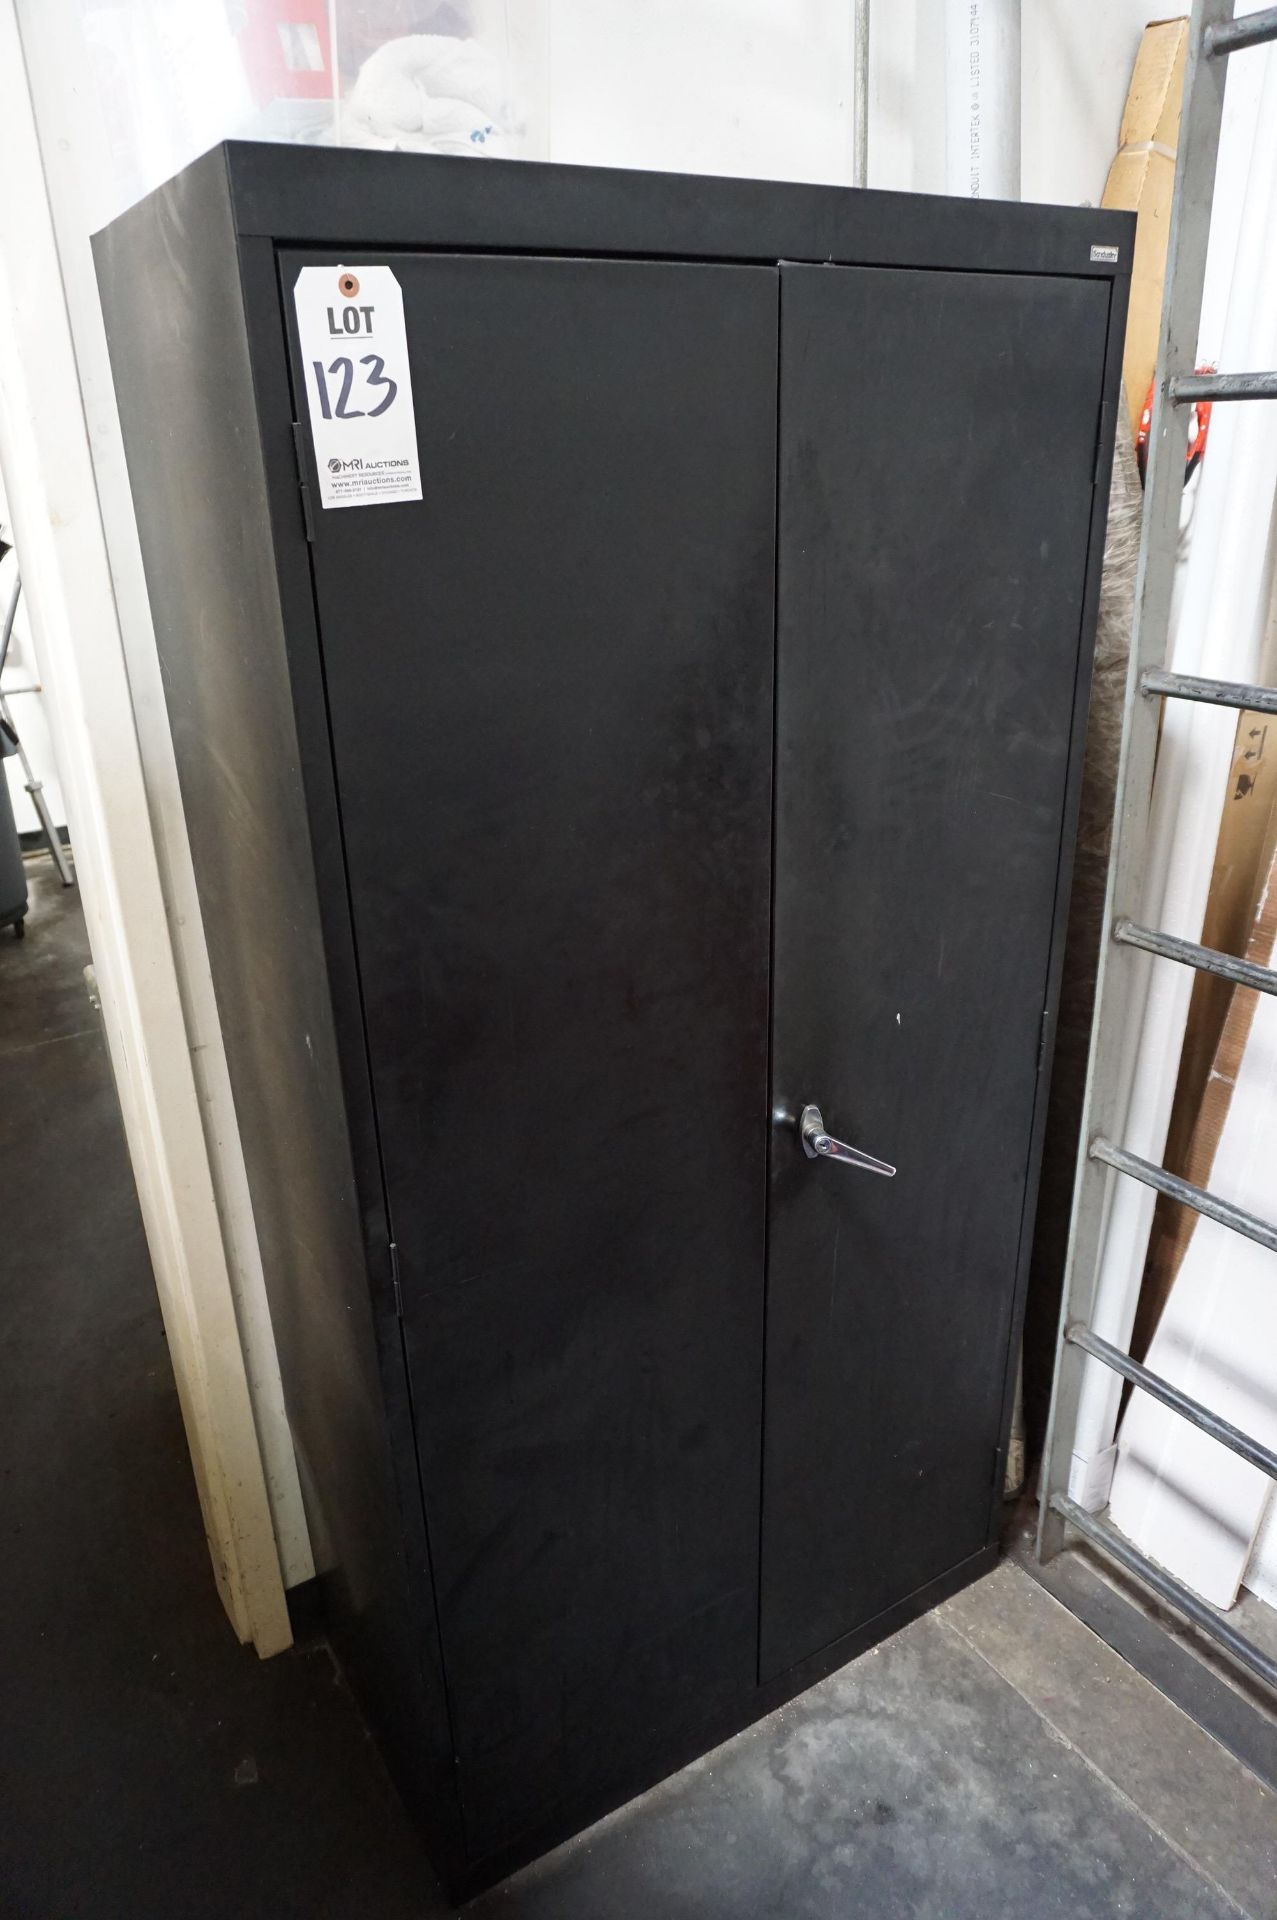 2 DRAWER STEEL SHOP CABINET, 6' H CABINET, CABINET ONLY NO CONTENTS